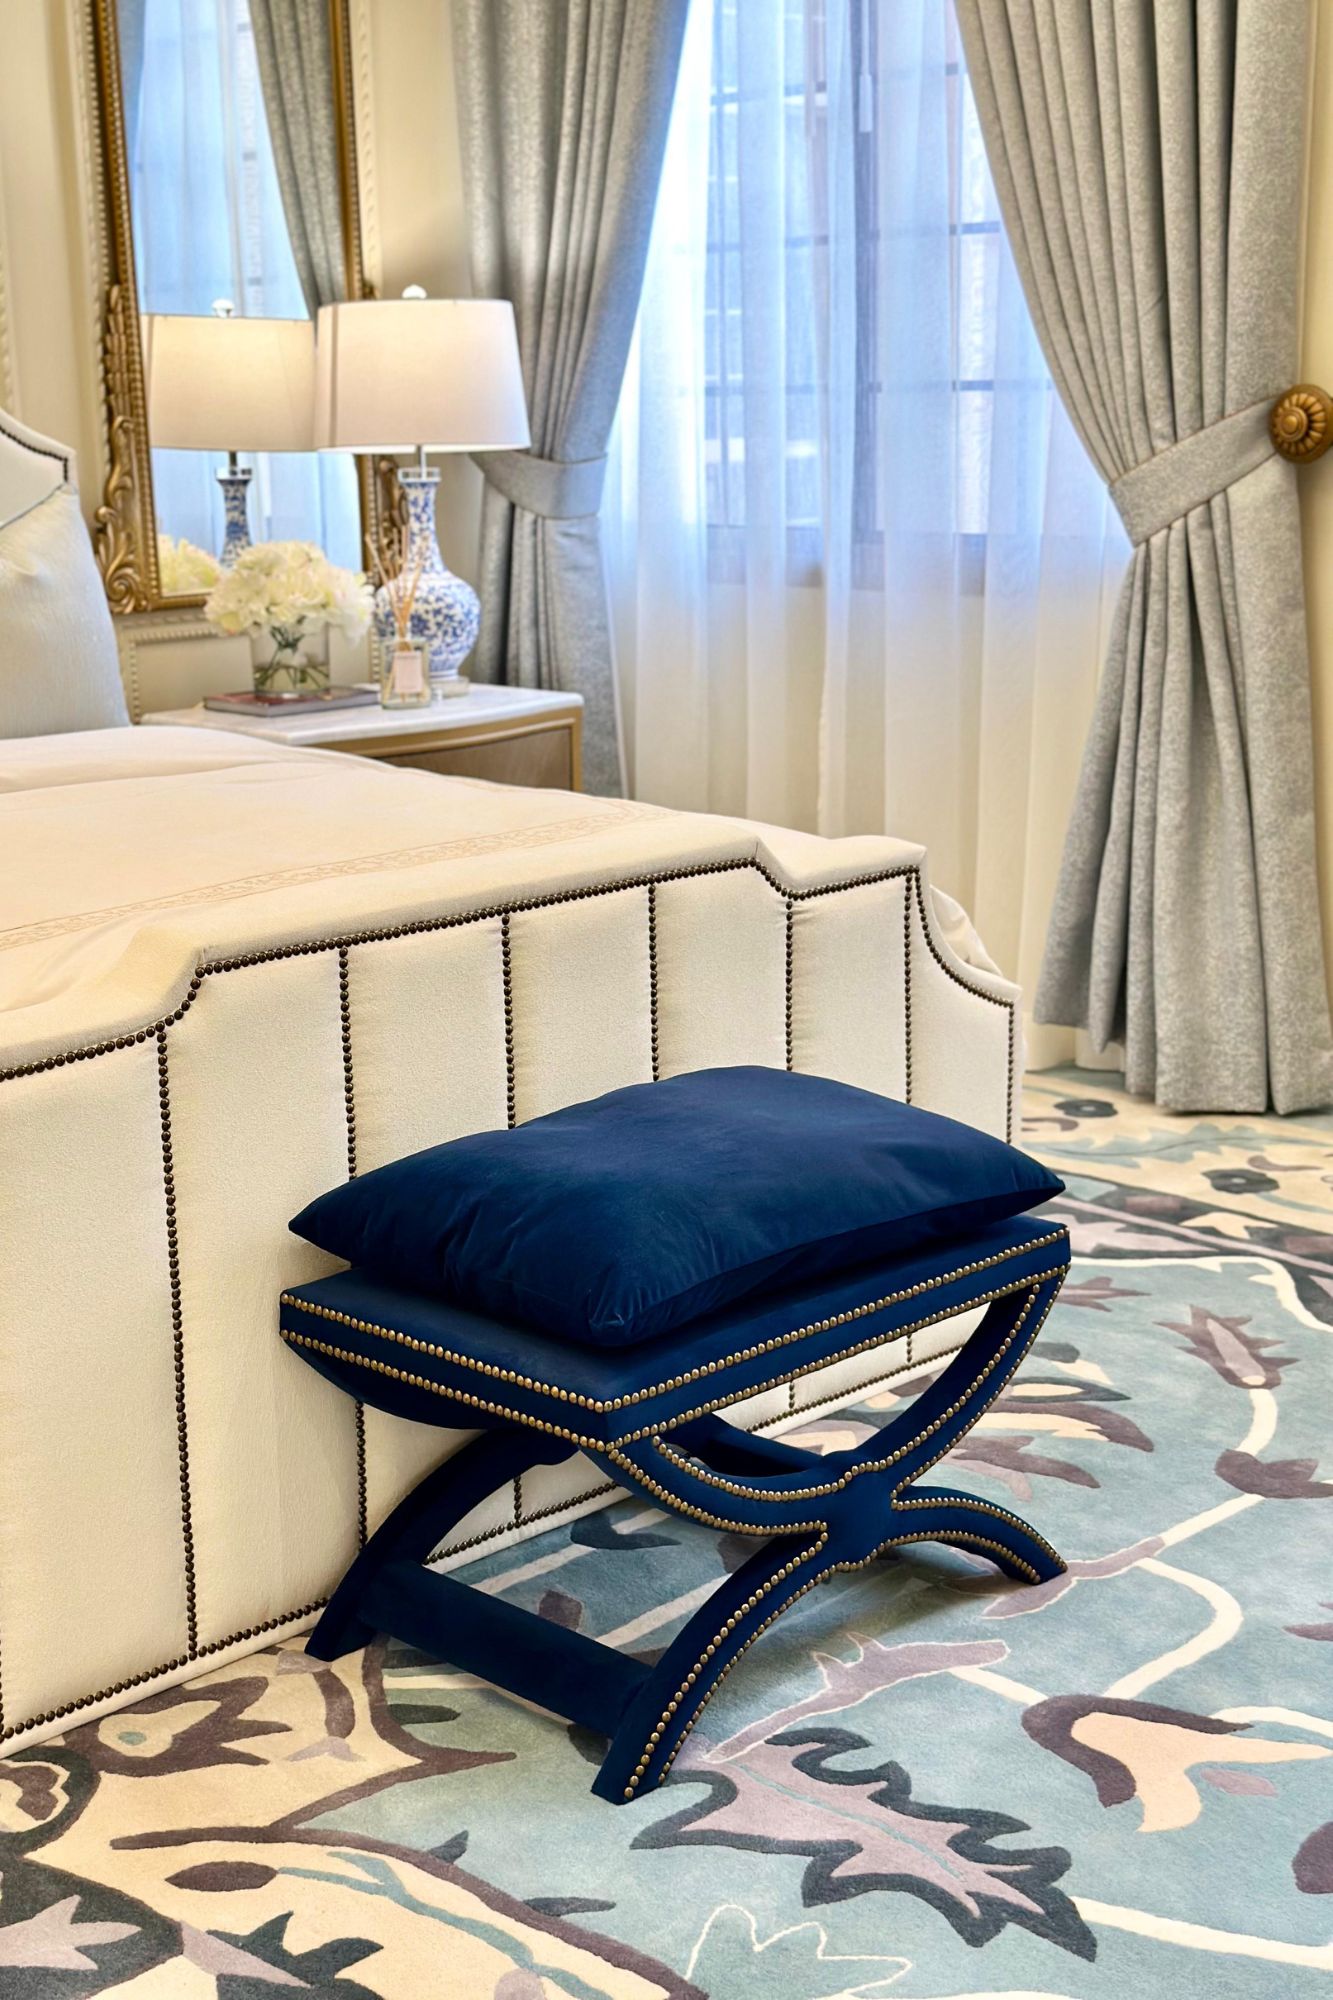 Erwin Ereno Design Studio, From Bland to Boutique: A Luxurious Guest Suite Makeover by Erwin Ereno Design Studio